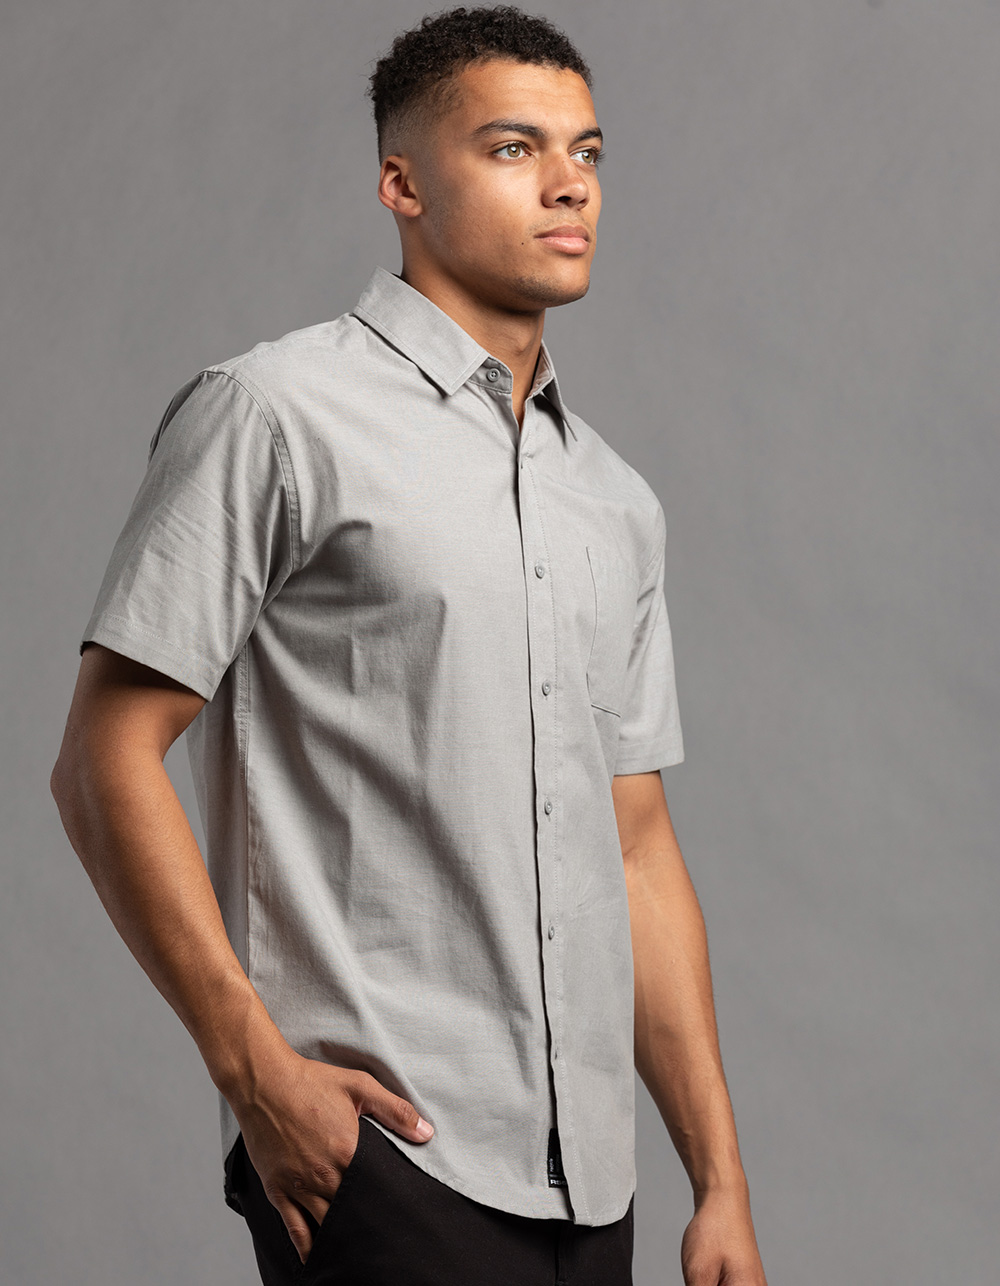 RSQ Mens Solid Chambray Button Up Shirt - GRAY